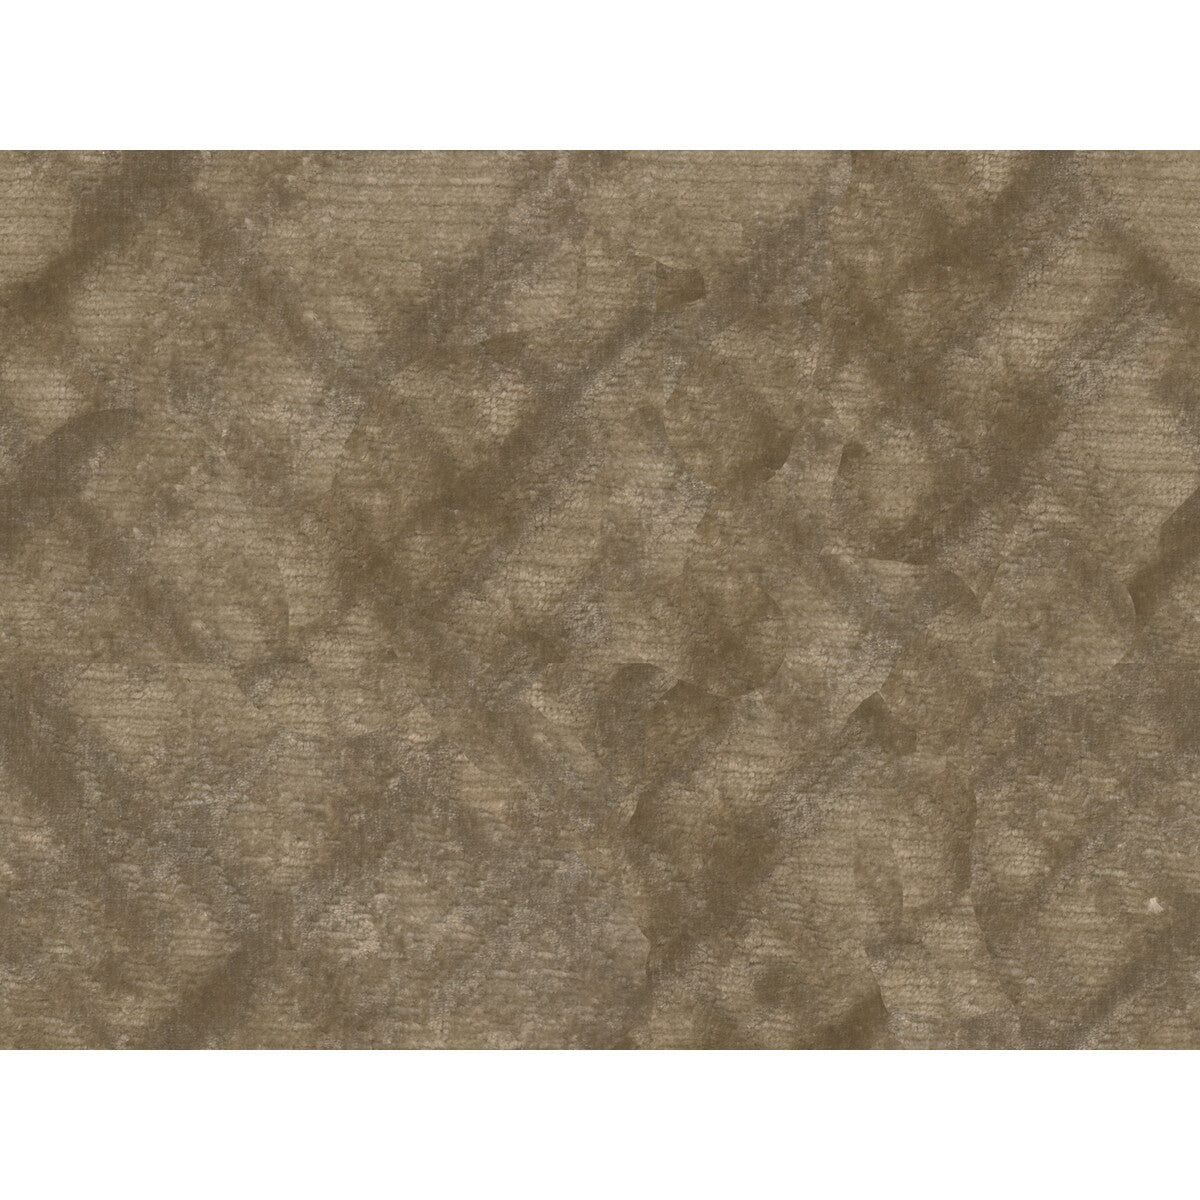 Cross The Line fabric in smoked pearl color - pattern 34333.1116.0 - by Kravet Couture